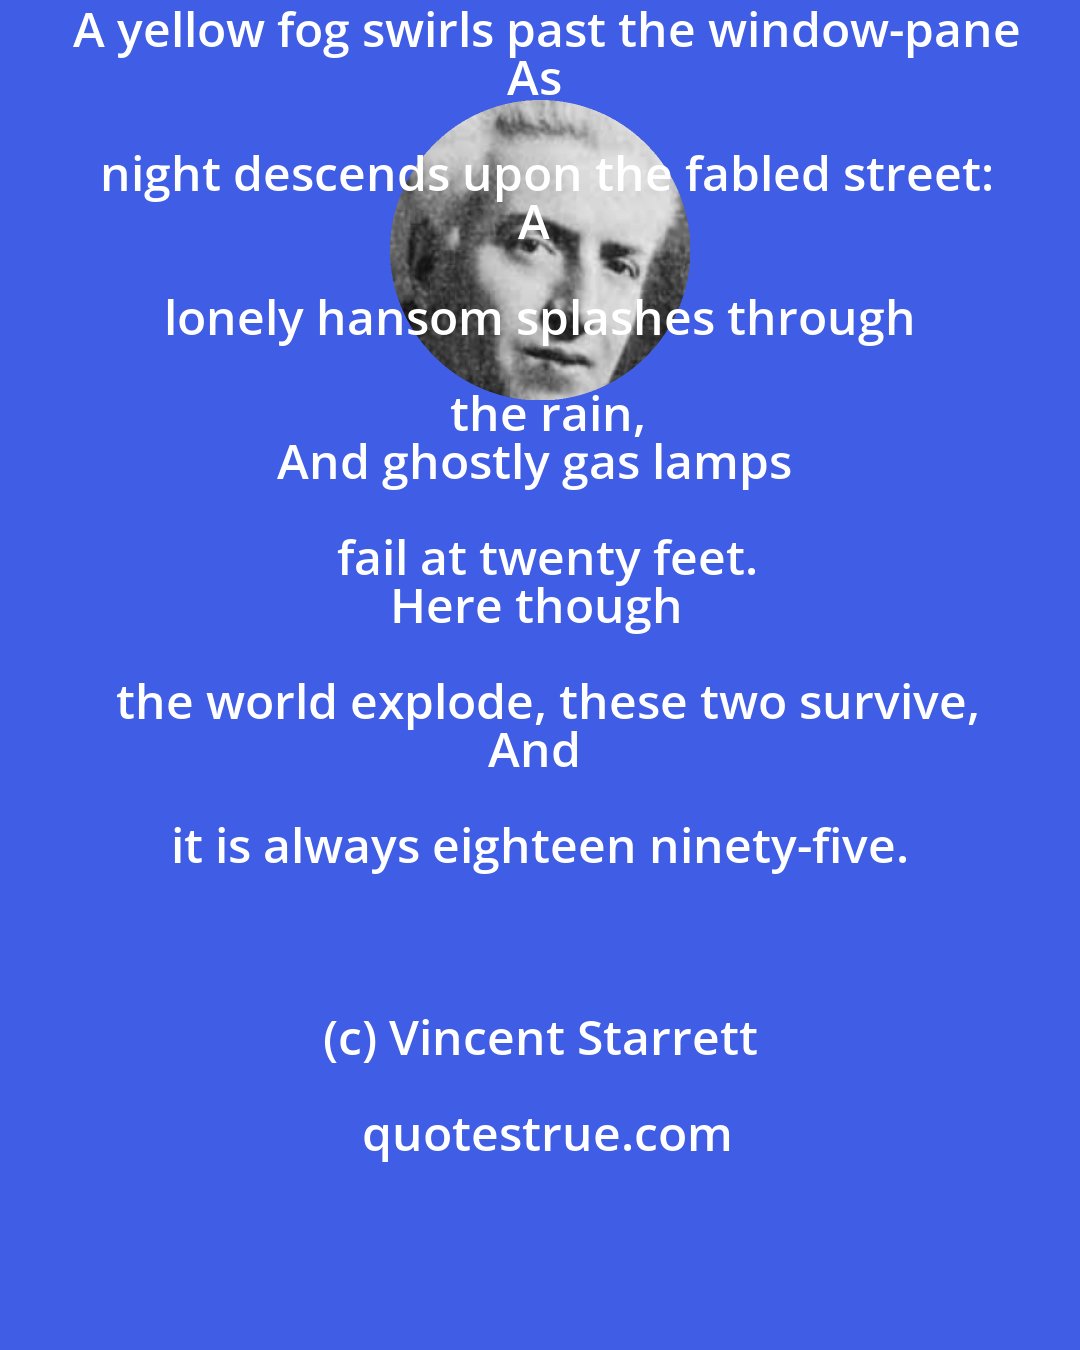 Vincent Starrett: A yellow fog swirls past the window-pane
As night descends upon the fabled street:
A lonely hansom splashes through the rain,
And ghostly gas lamps fail at twenty feet.
Here though the world explode, these two survive,
And it is always eighteen ninety-five.